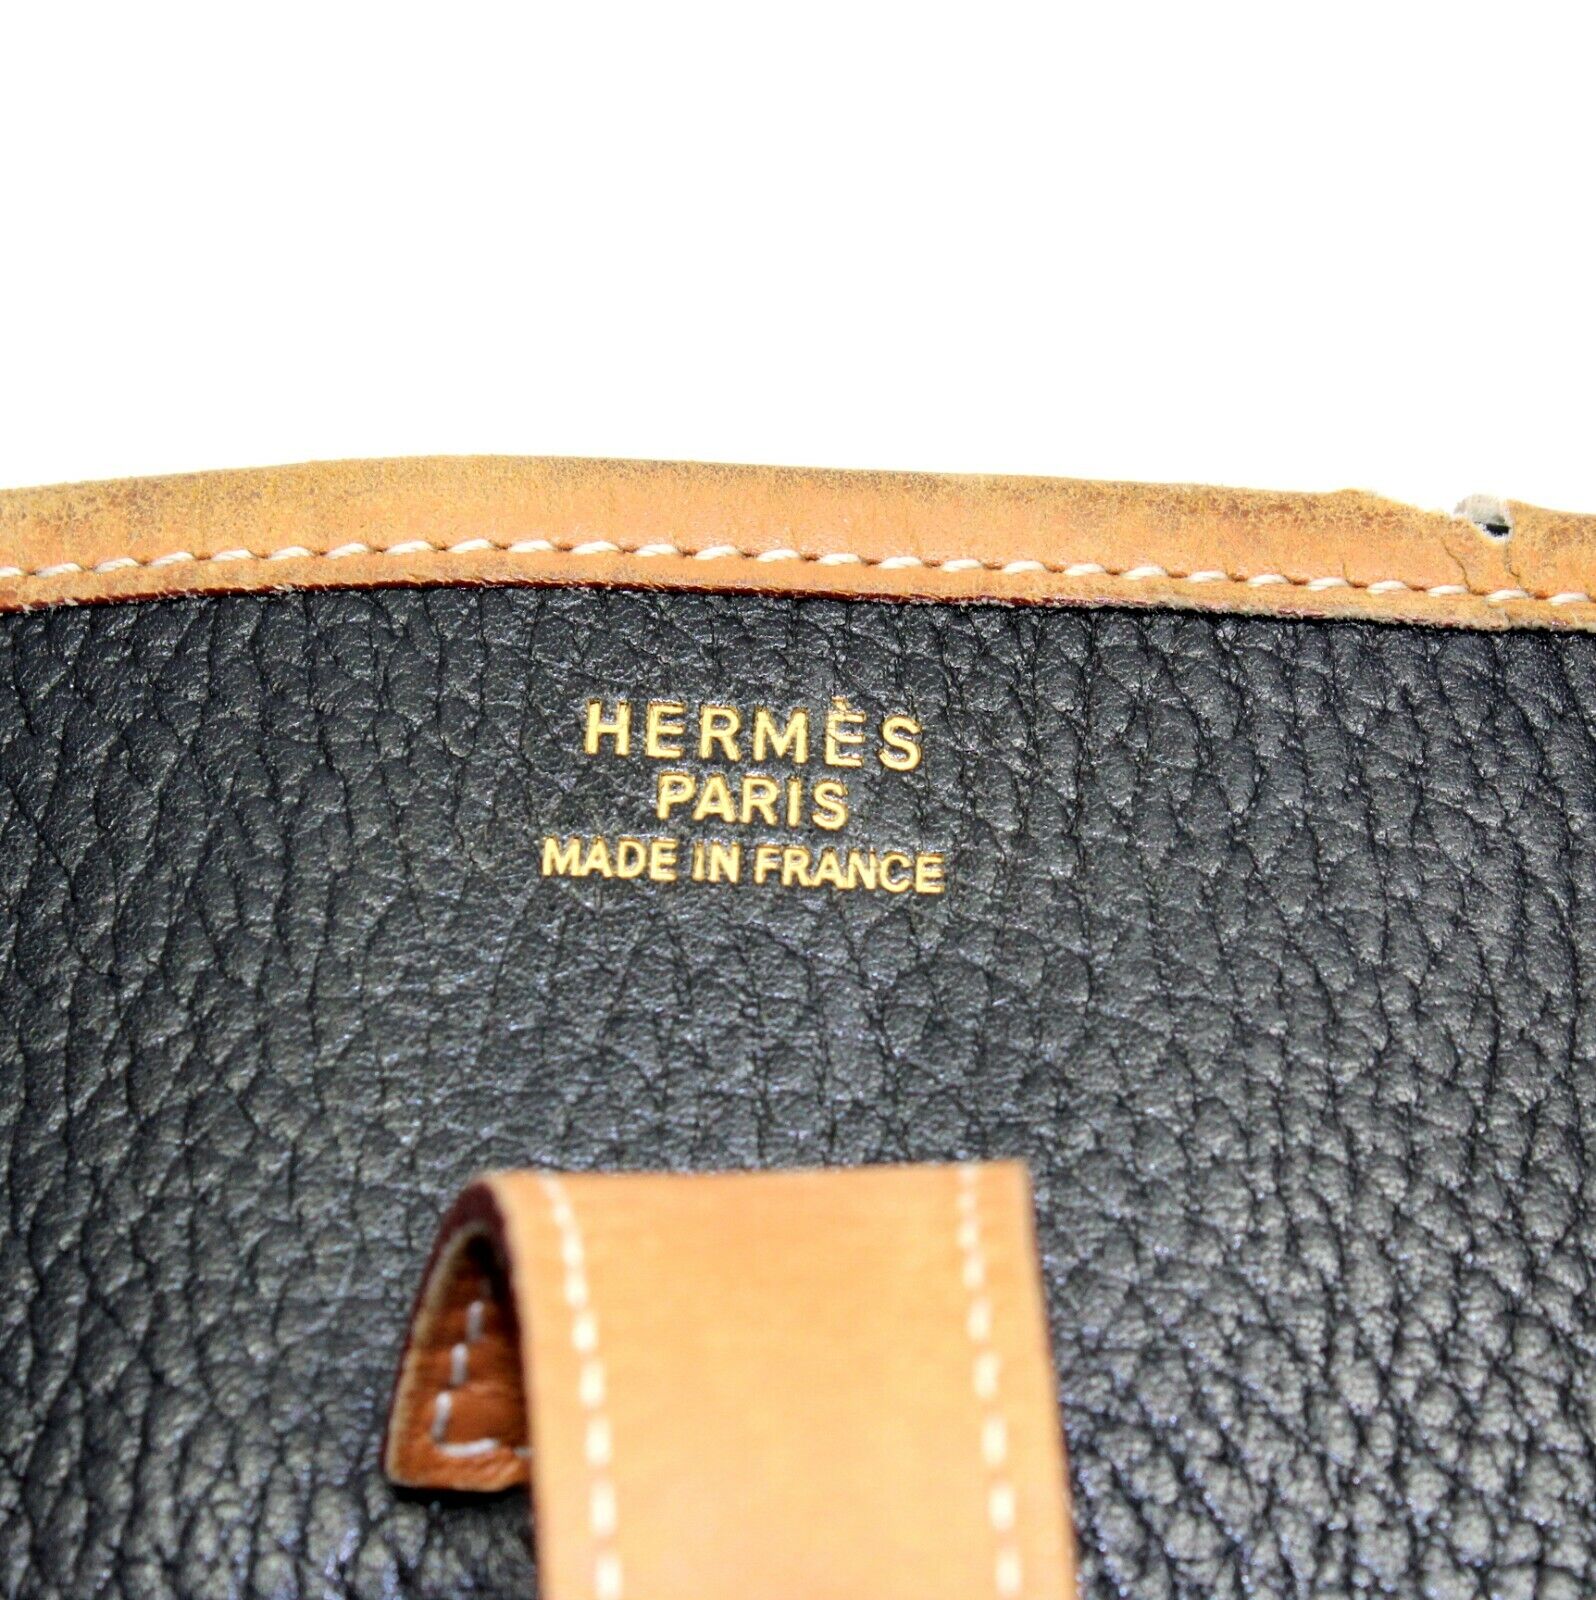 The Complete Guide To Hermes Bag Styles | Bags Of Luxury